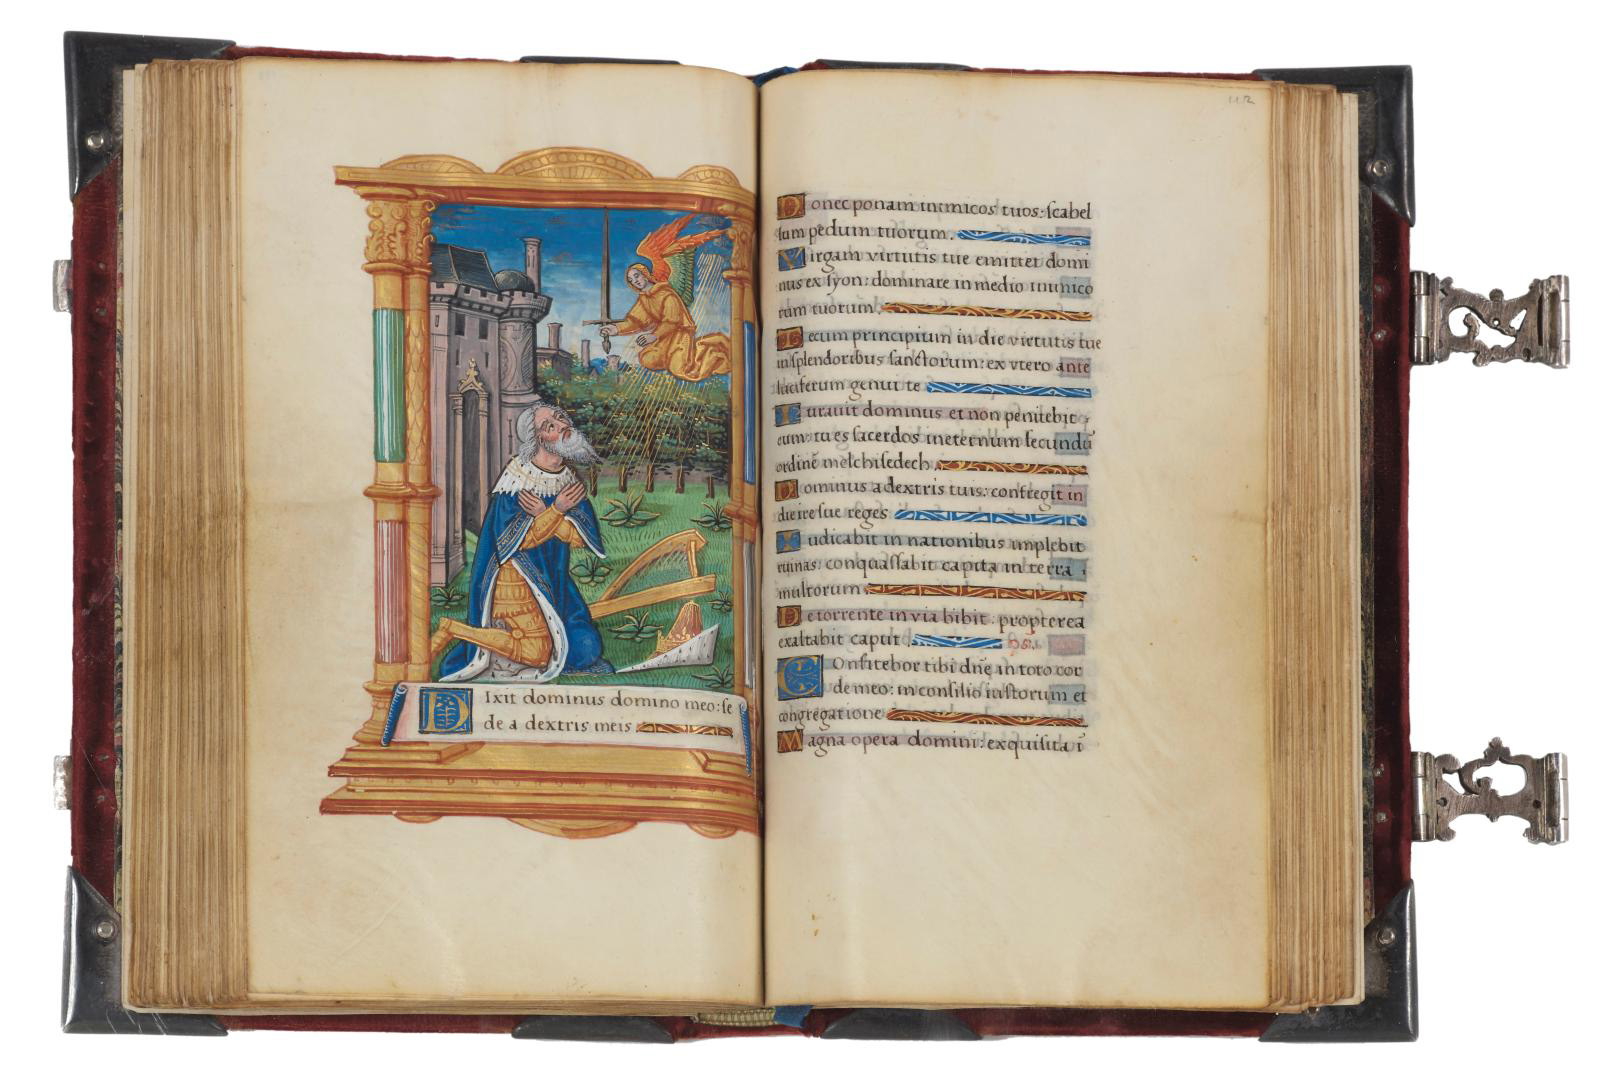 Paris, c. 1520-1530. Ferial psalter in French, illuminated manuscript on parchment with seven large miniatures by the artist designated as